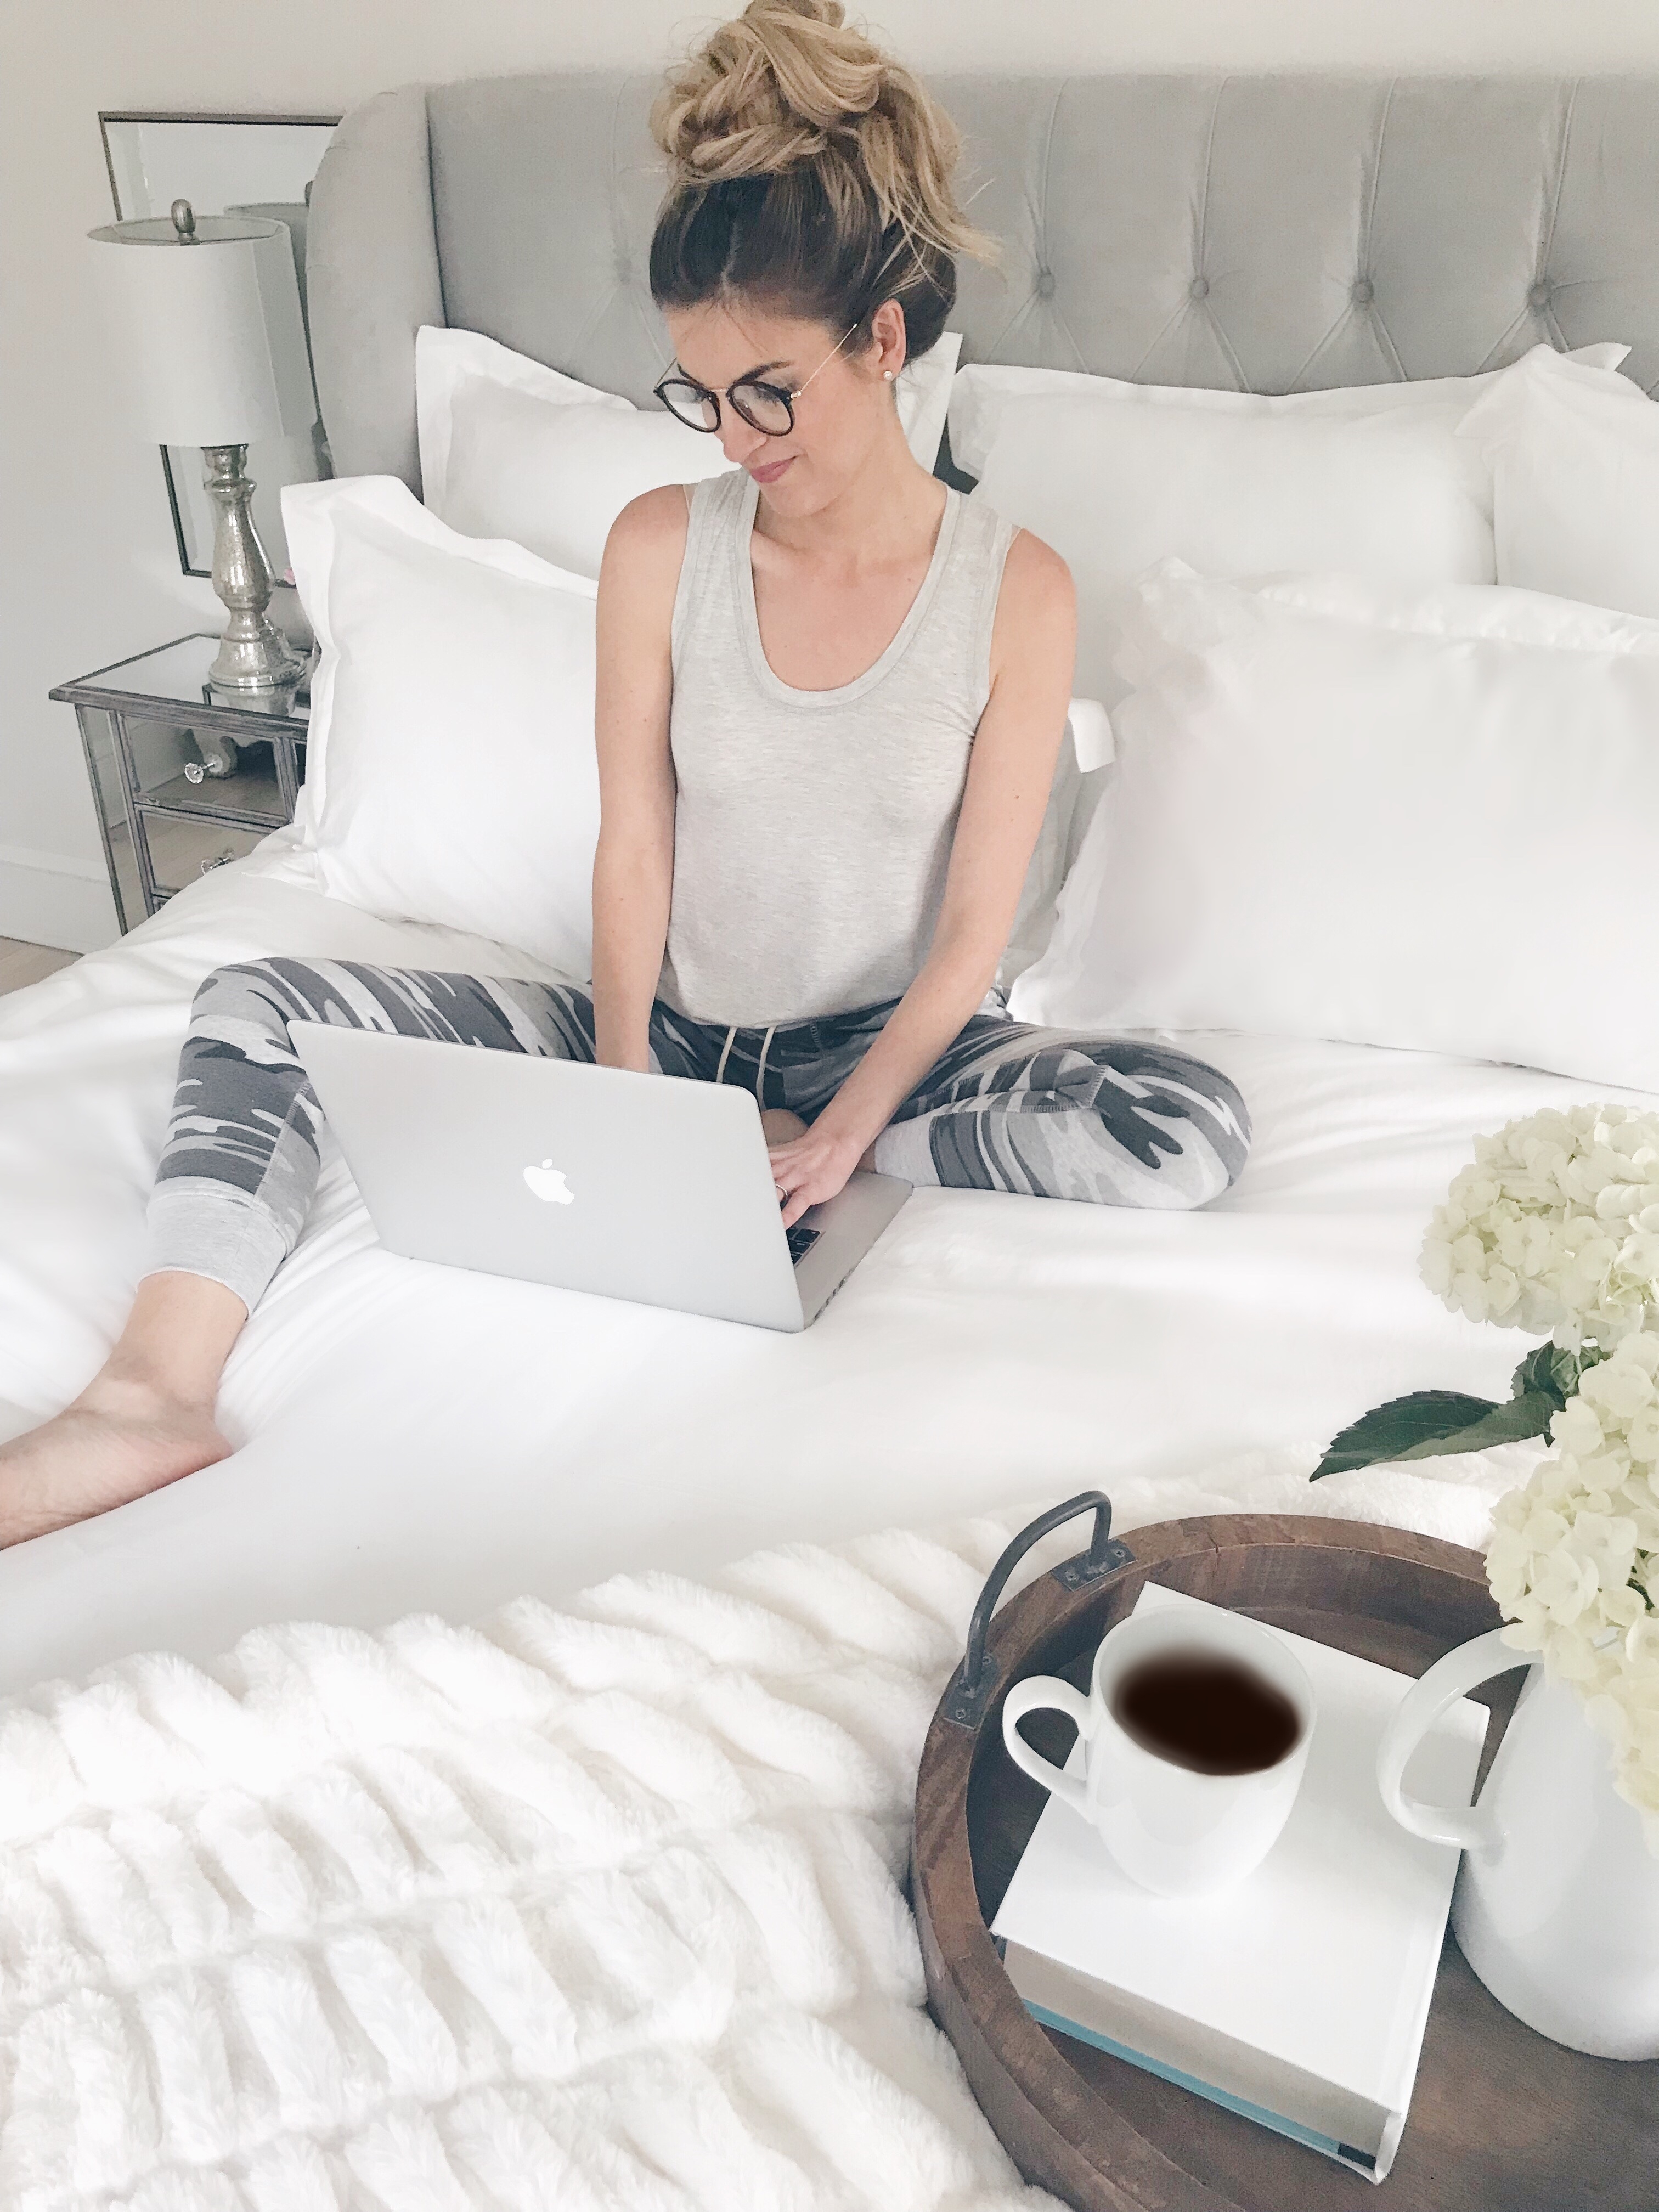 rachel moore connecticut fashion blogger sharing her new organic white bedding and master bedroom